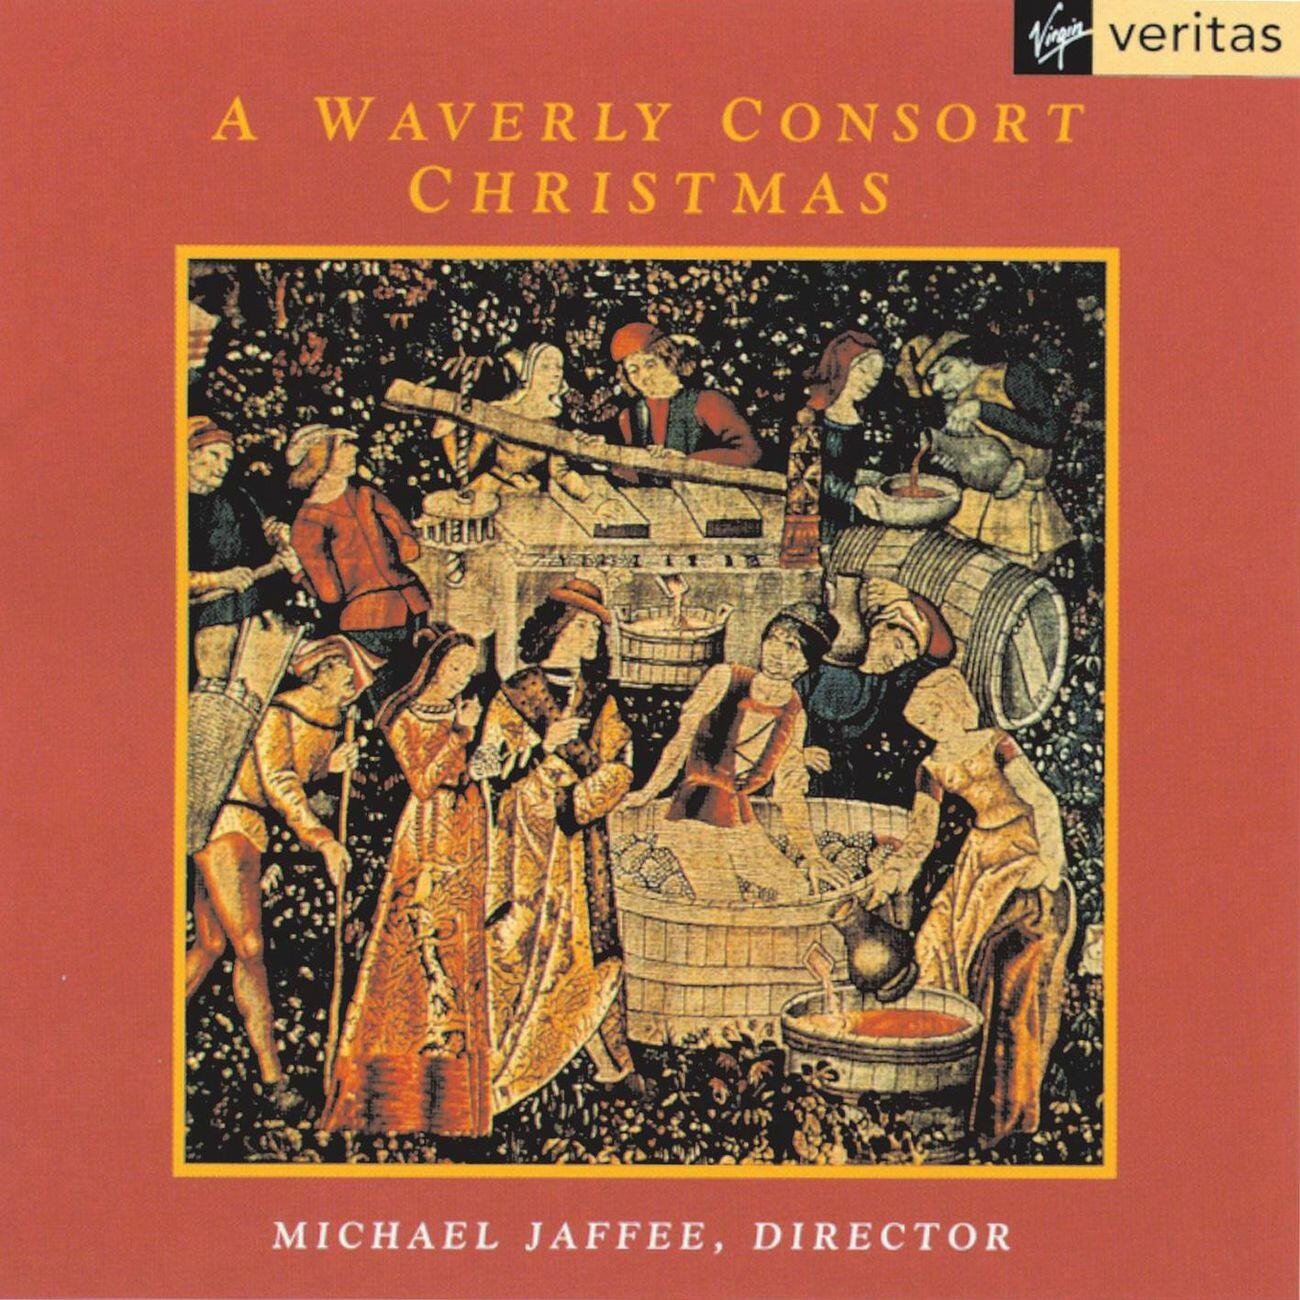 Waverly Consort - A Waverly Consort Christmas | iHeart